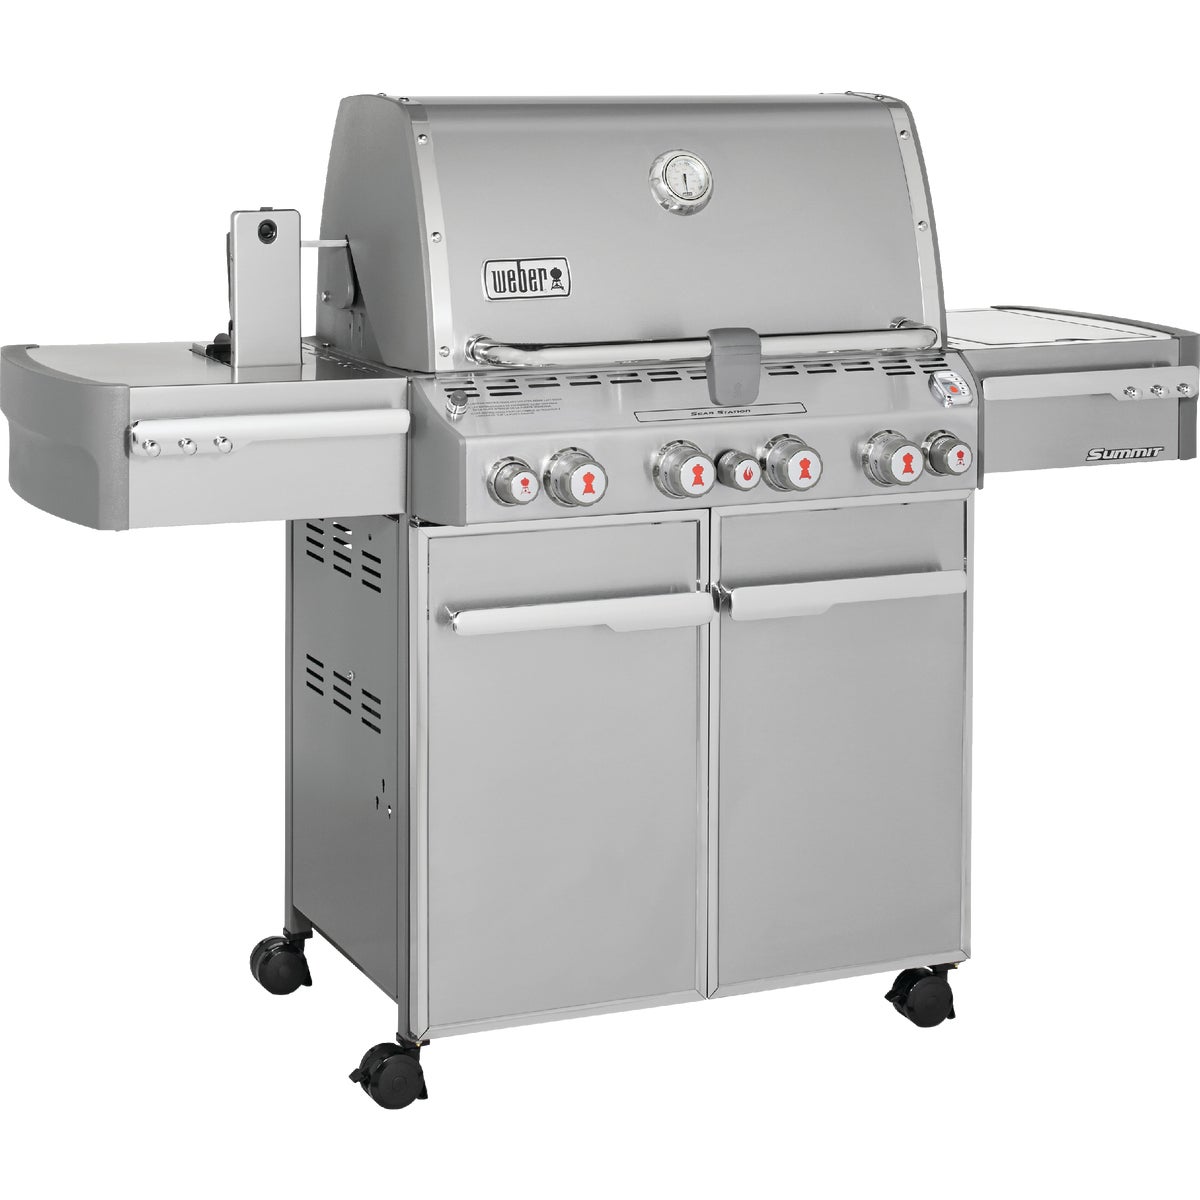 Item 806927, The Summit gas grill features a stainless steel enclosed cart with chrome-